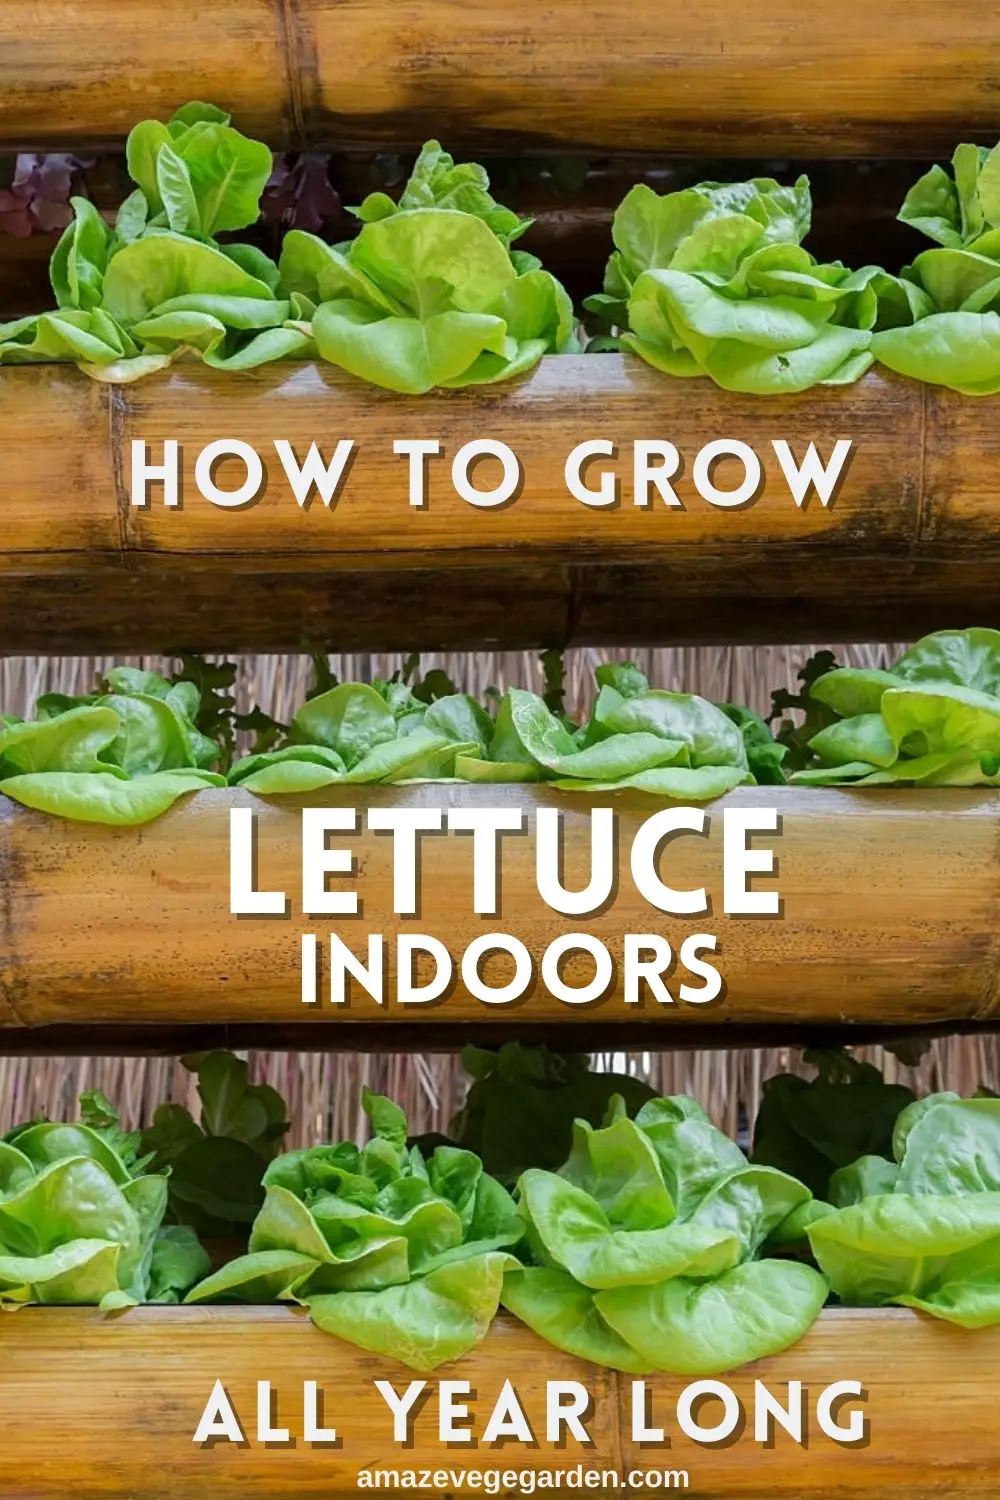 How To Grow Lettuce Indoors in Container All Year Long